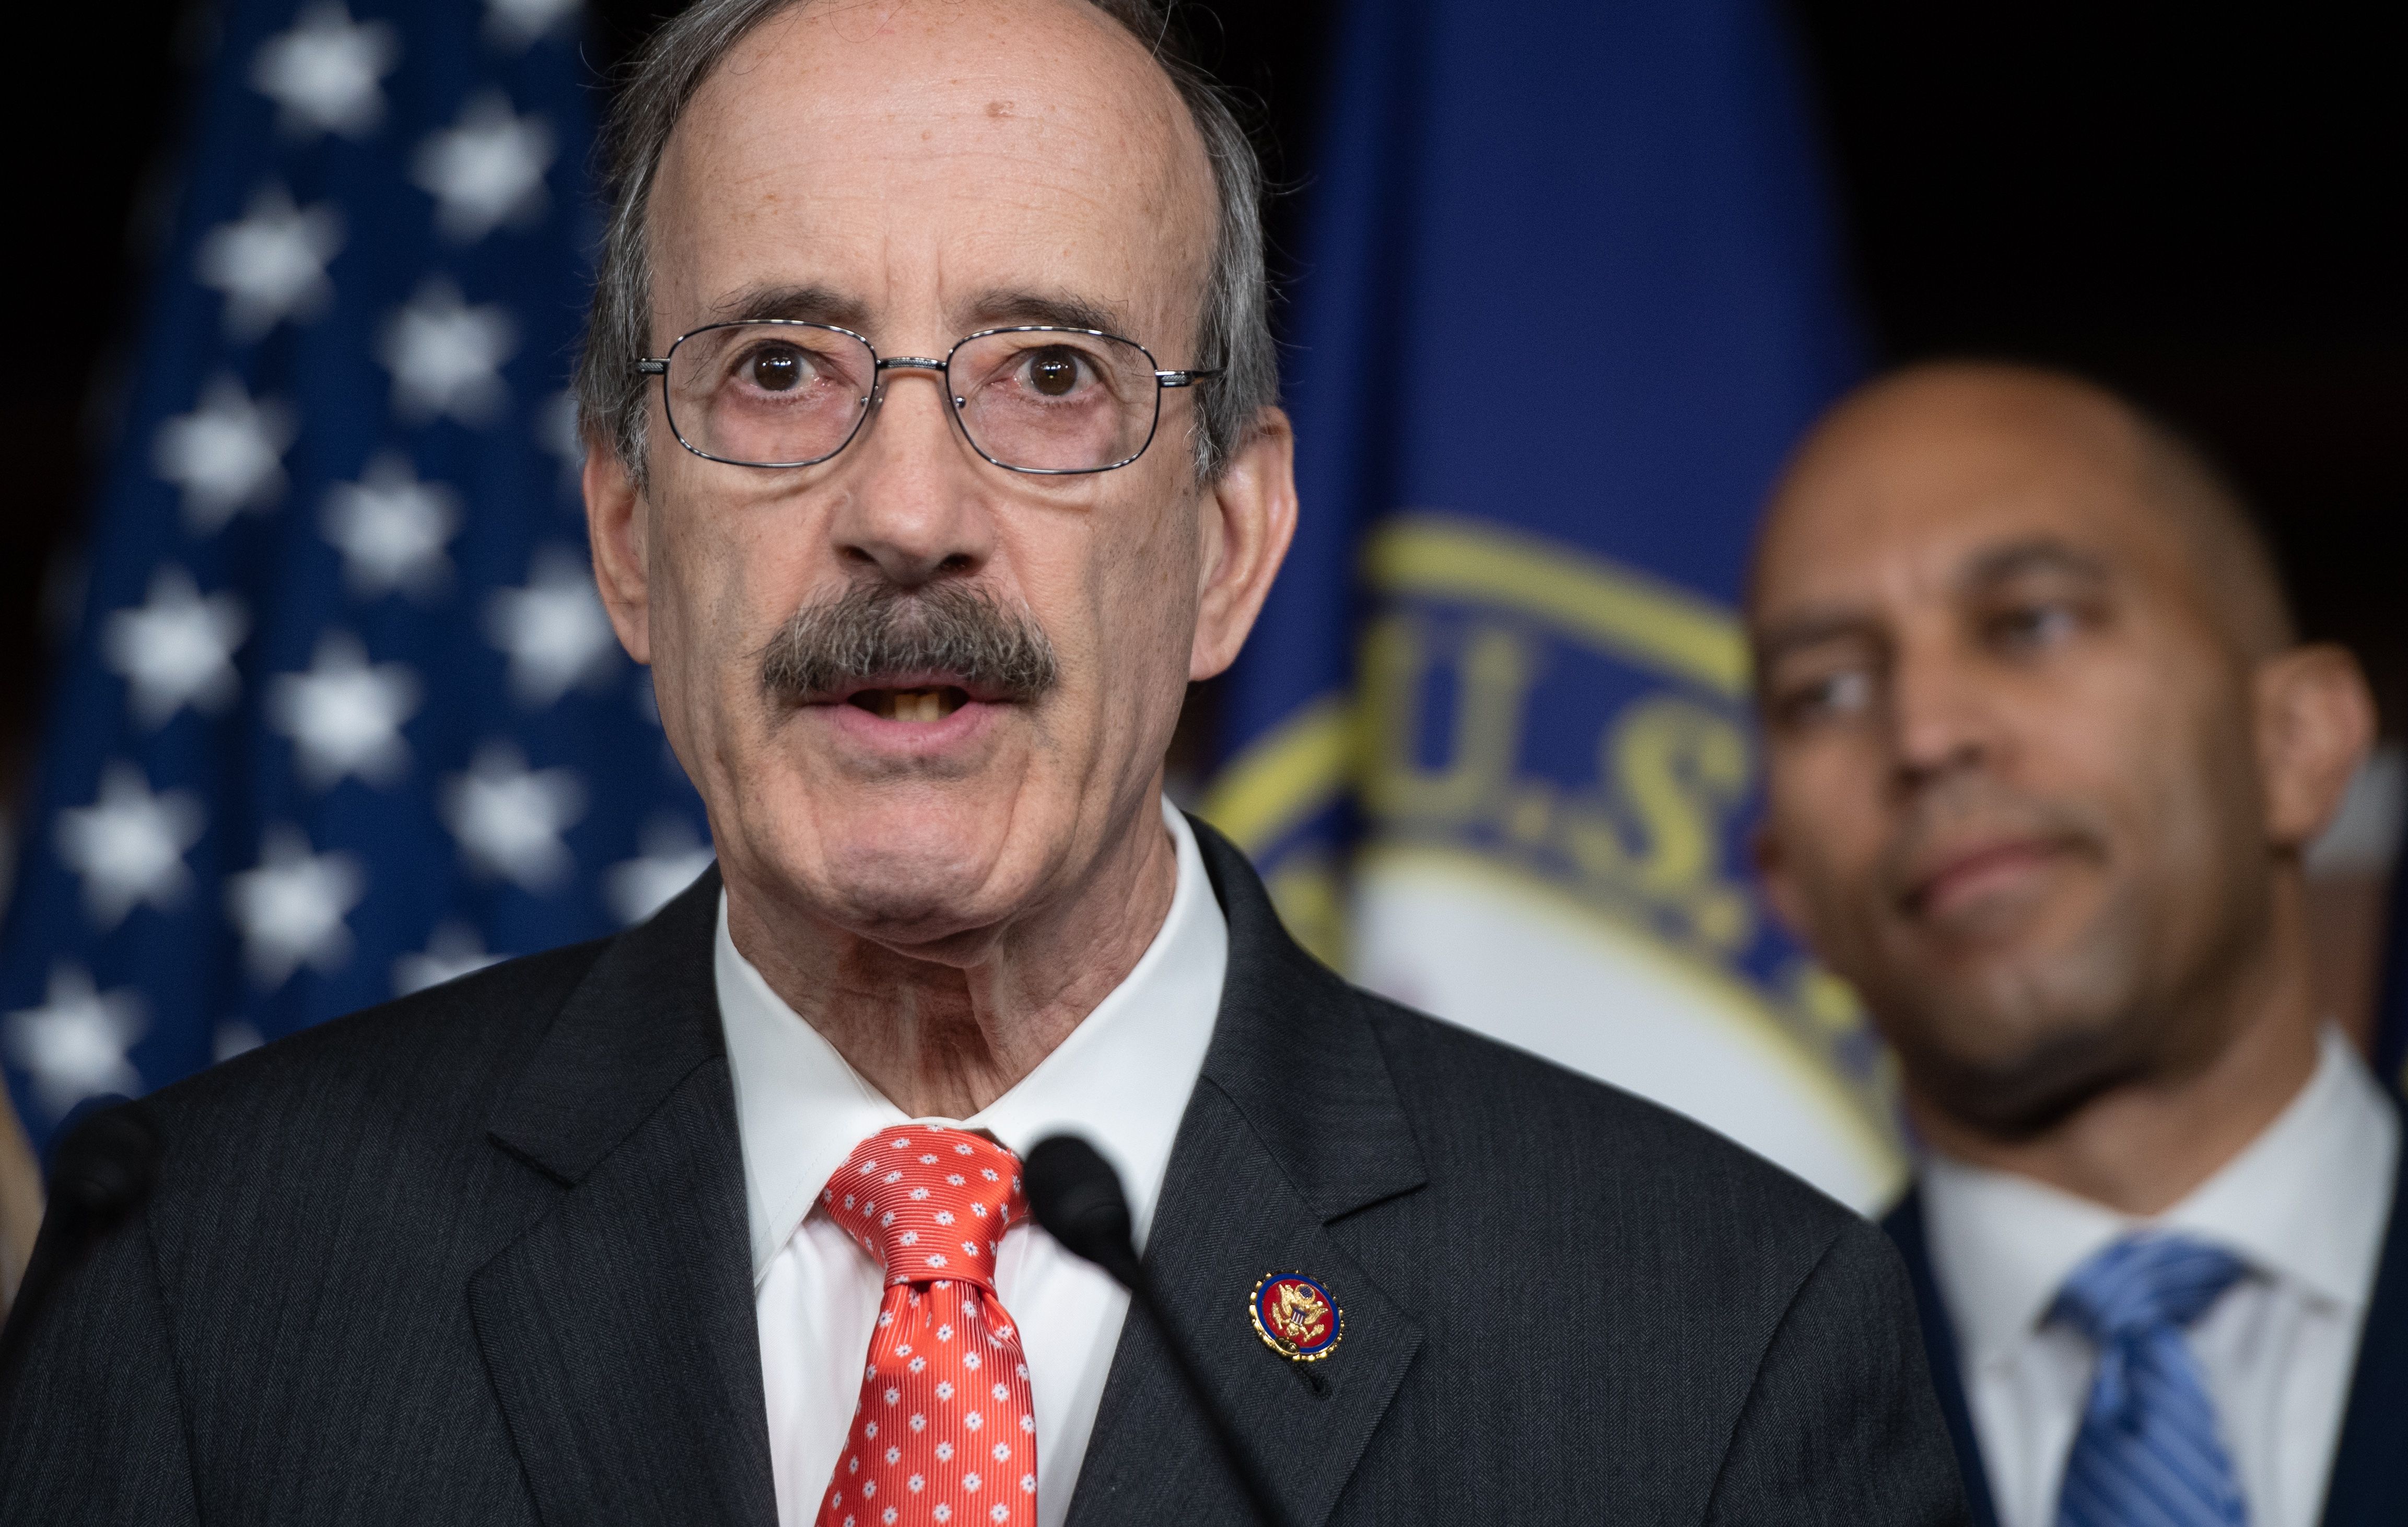 Democratic Rep. Eliot Engel Caught on Hot Mic Amid Unrest: ‘If I Didn’t Have a Primary, I Wouldn’t Care’